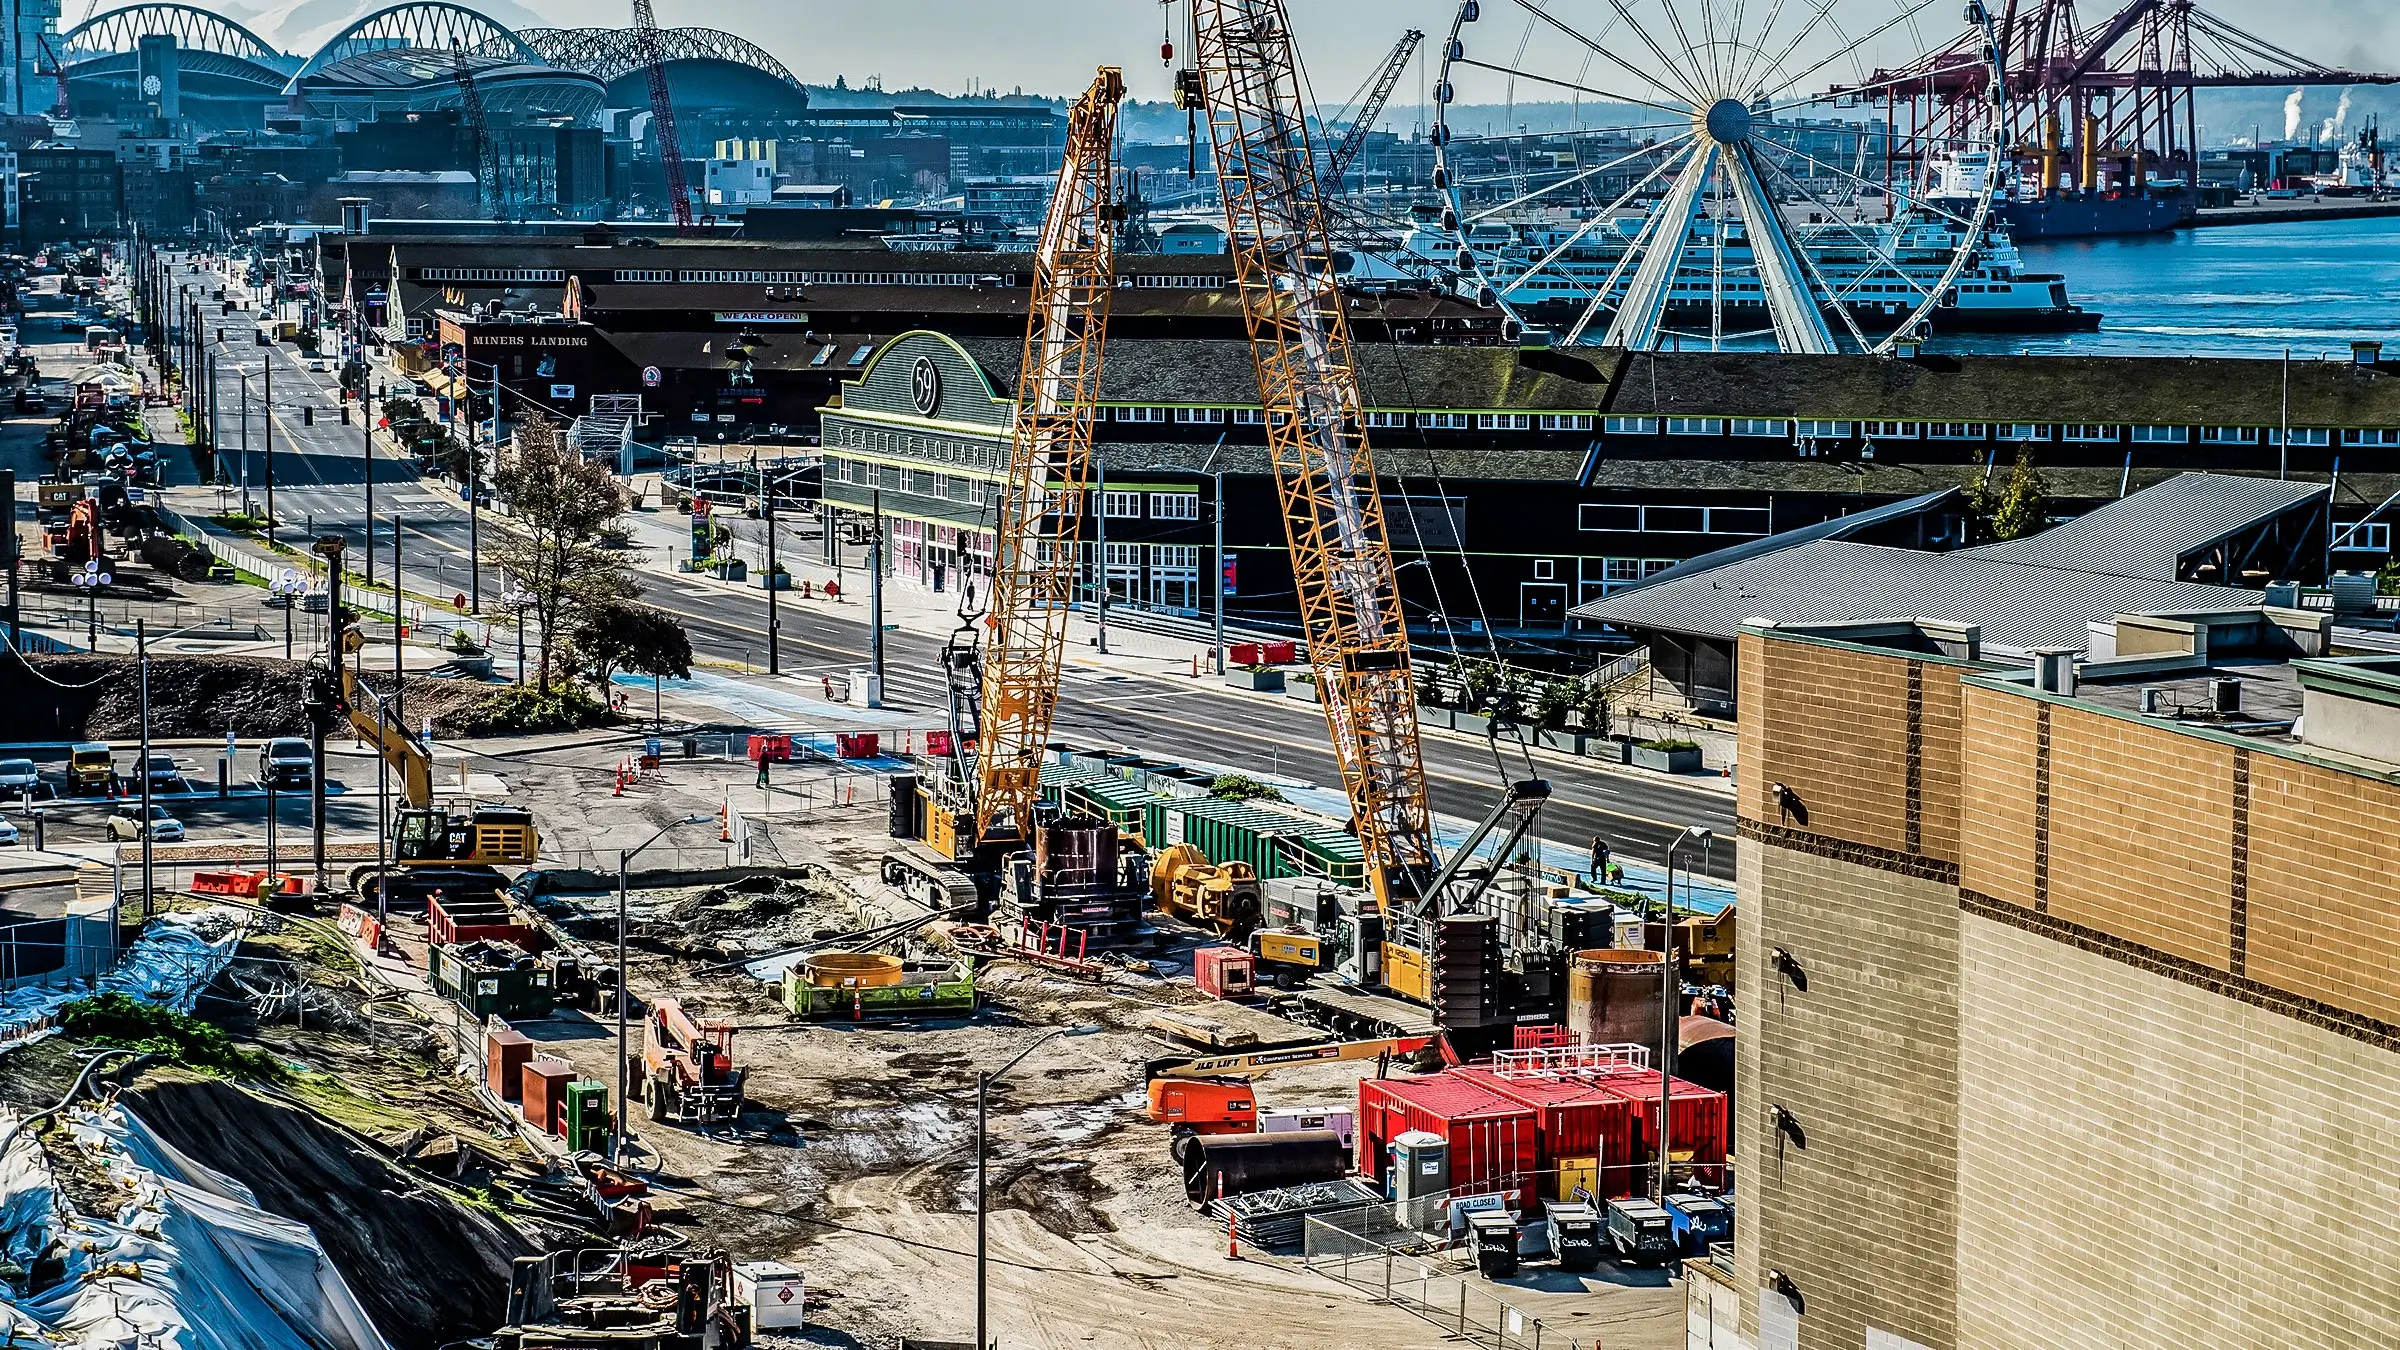 Two large cranes operate near the Seattle Waterfront on a foundations job